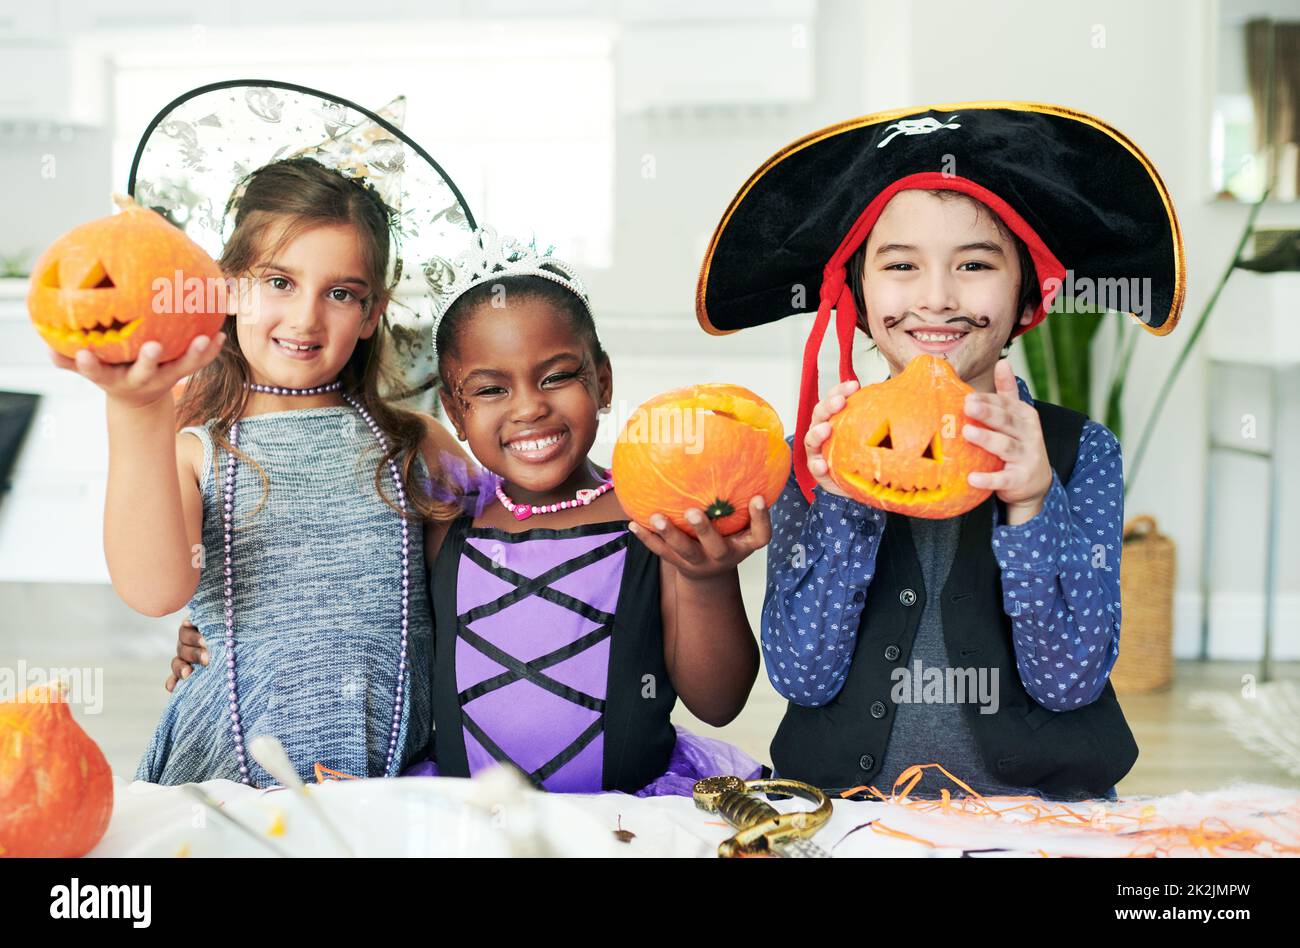 Some pumpkin party fun. Shot of a group of little children showing their carved pumpkins at a party. Stock Photo